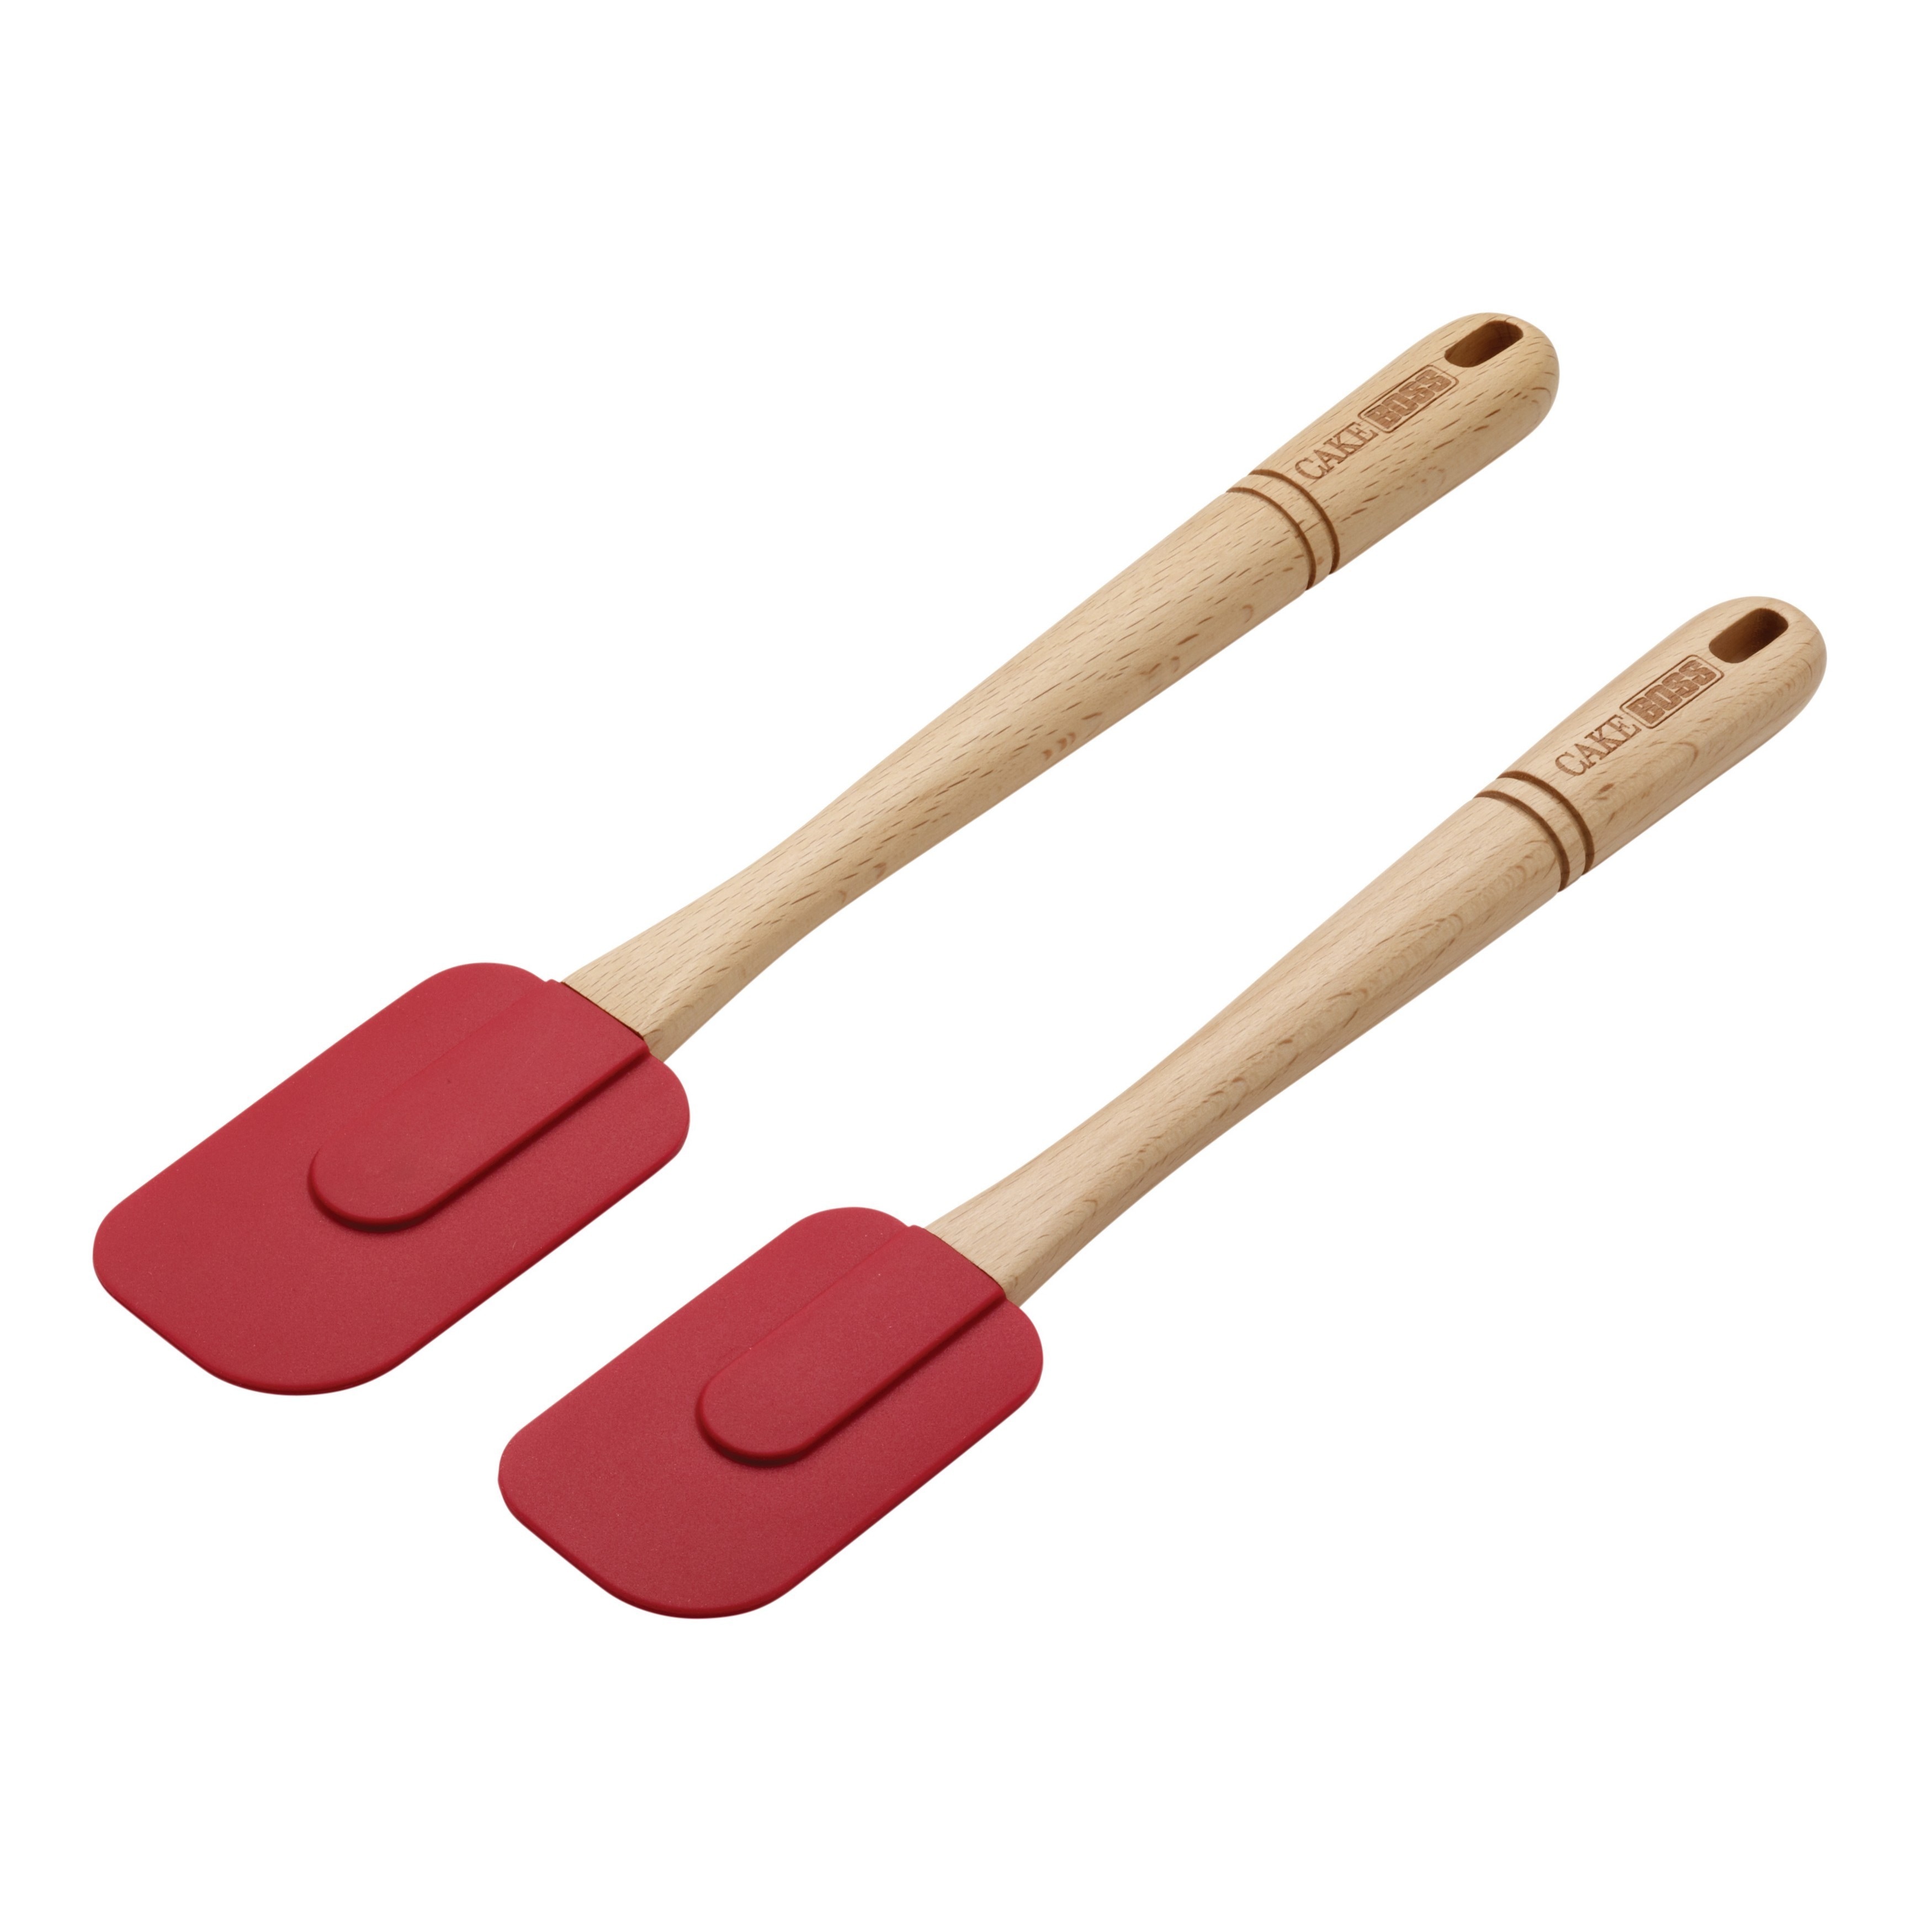 Cake Boss Red Wooden Tools and Gadgets 2 Piece Silicone Spatula Set L16242831